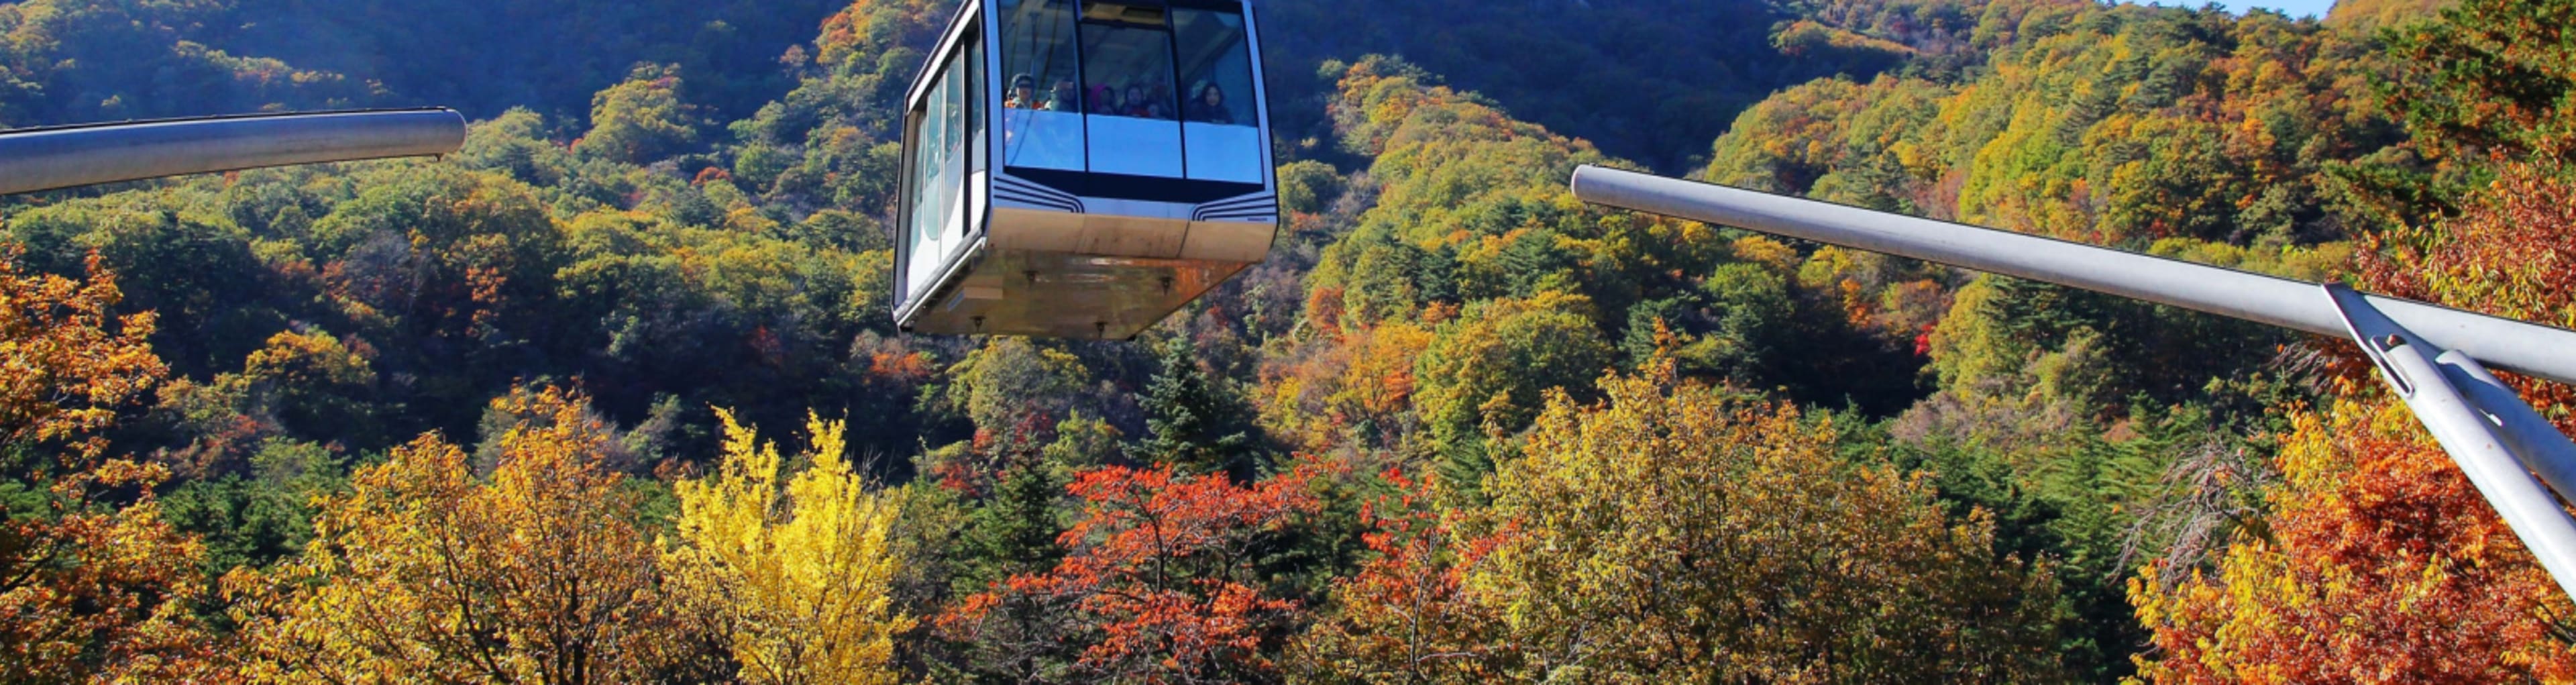 Cable car over the Seoraksan National Park in Korea